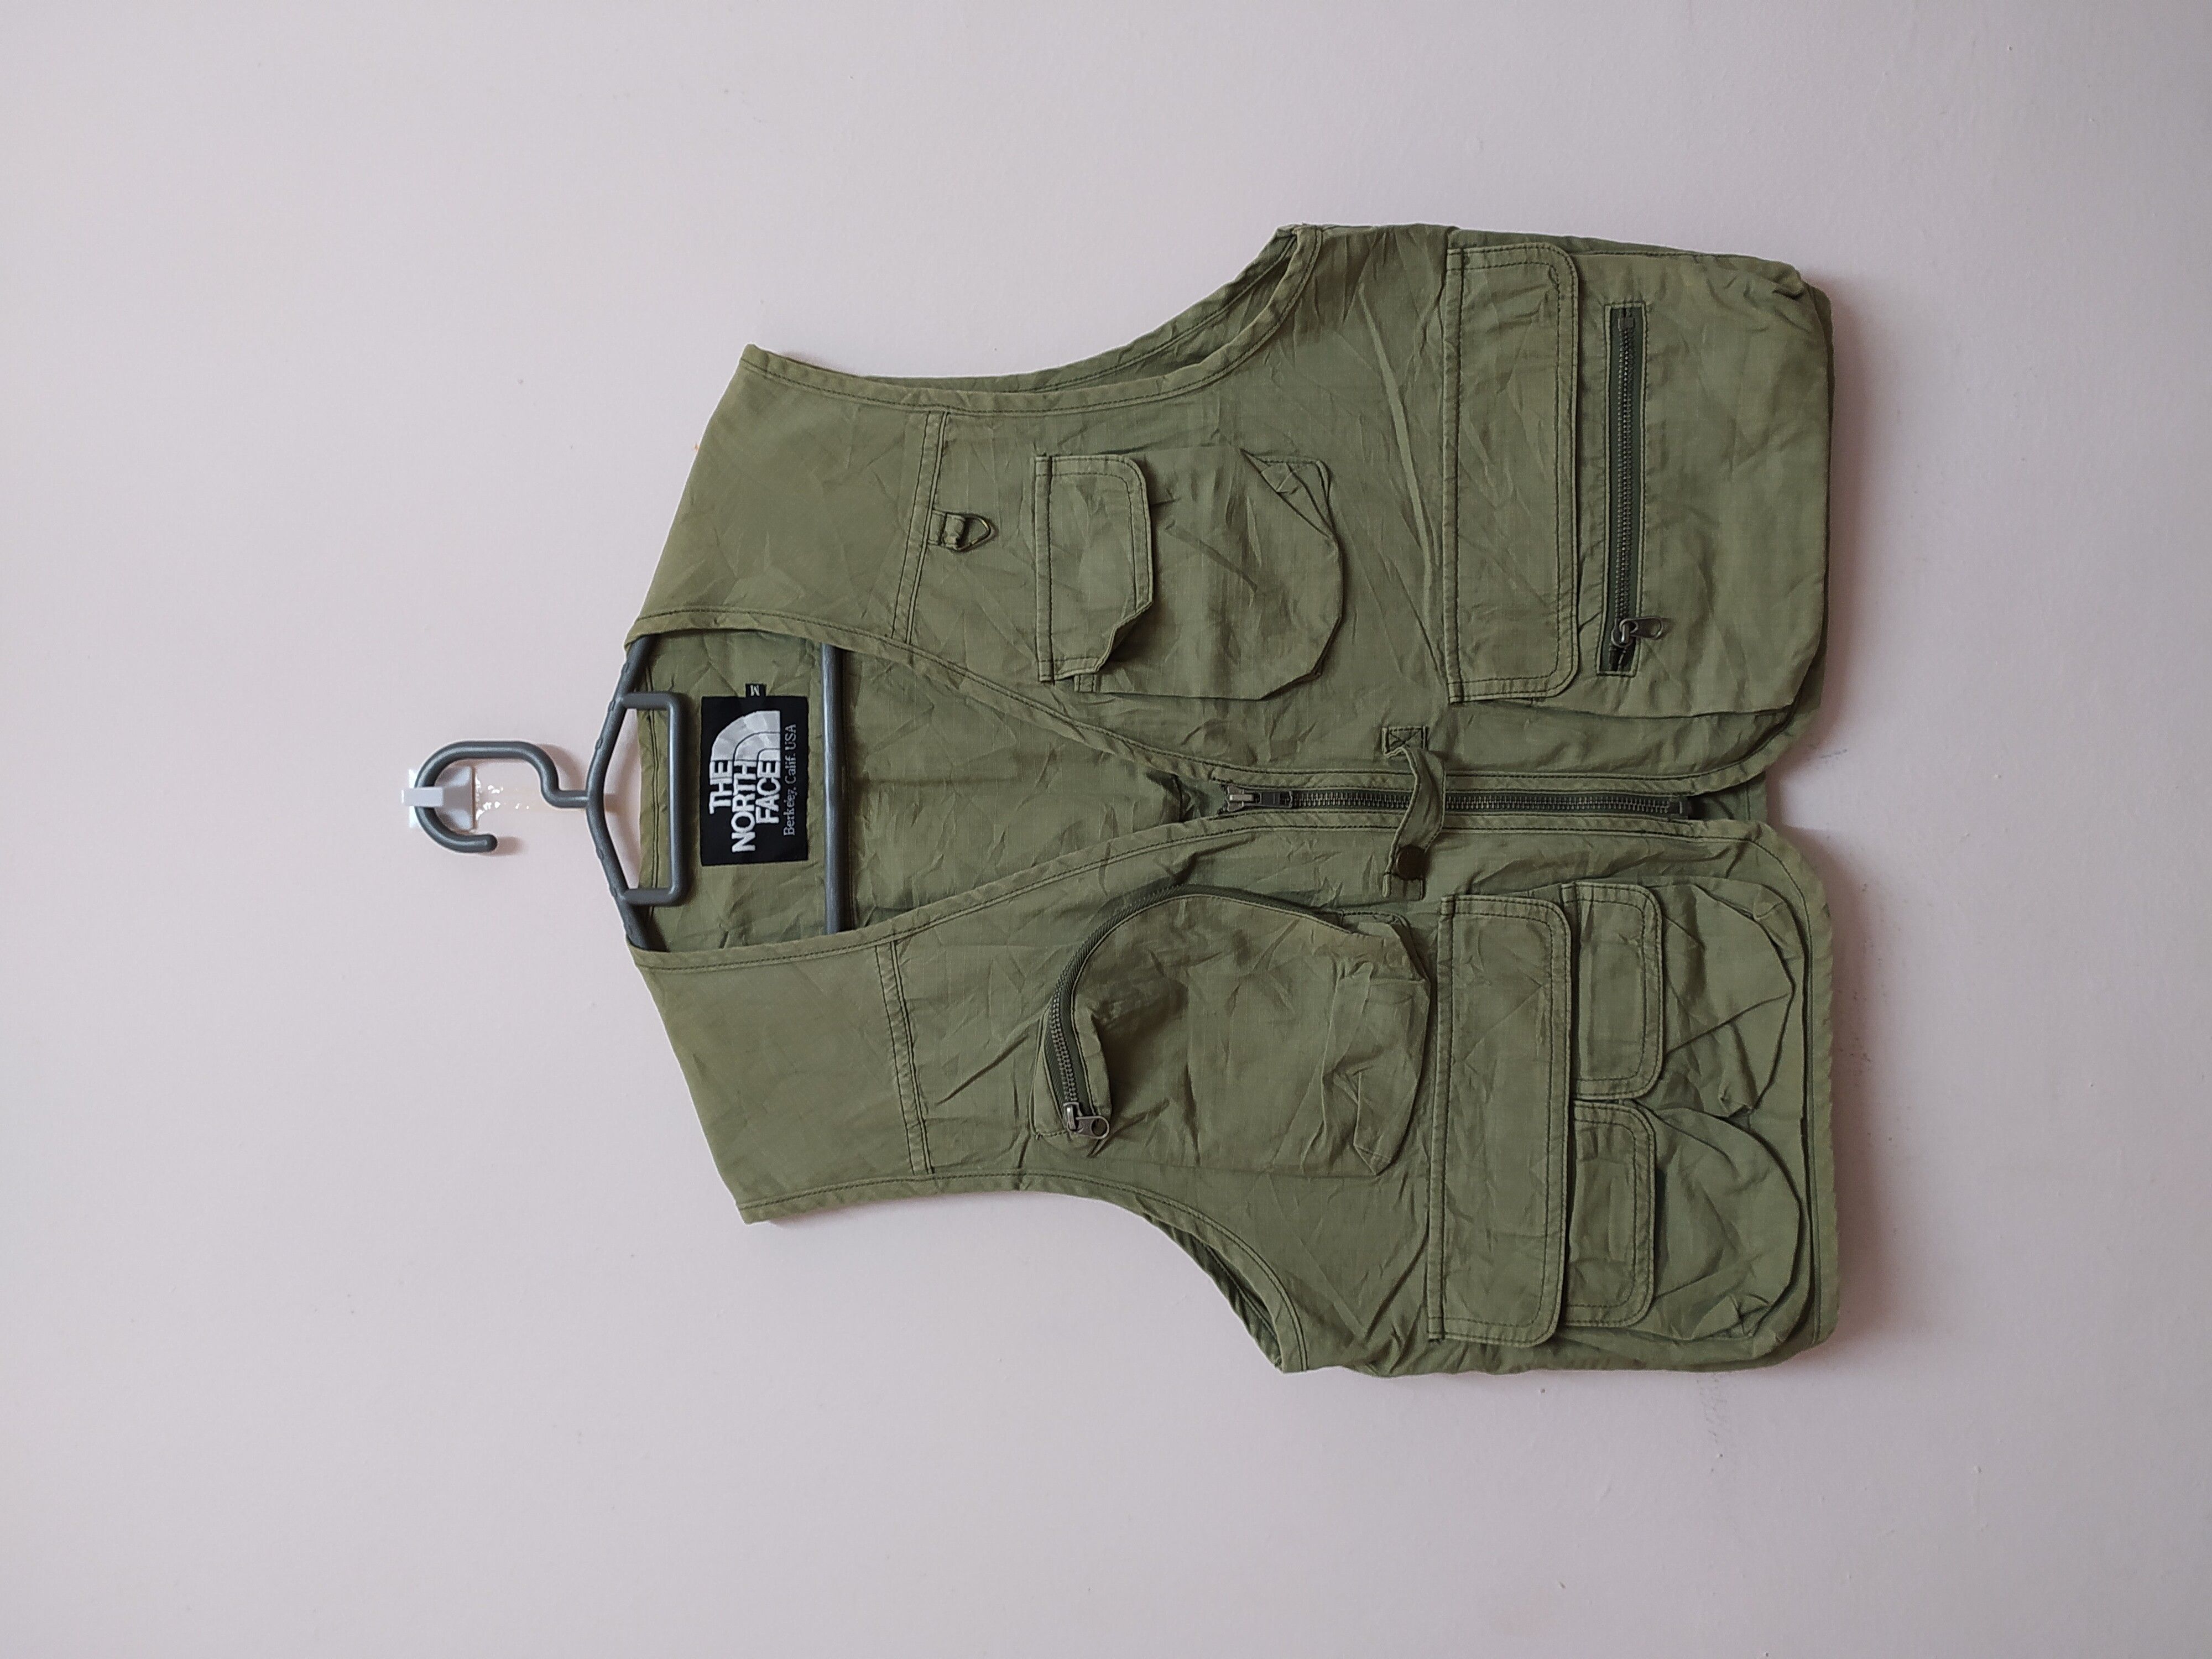 North Face Fishing Vest